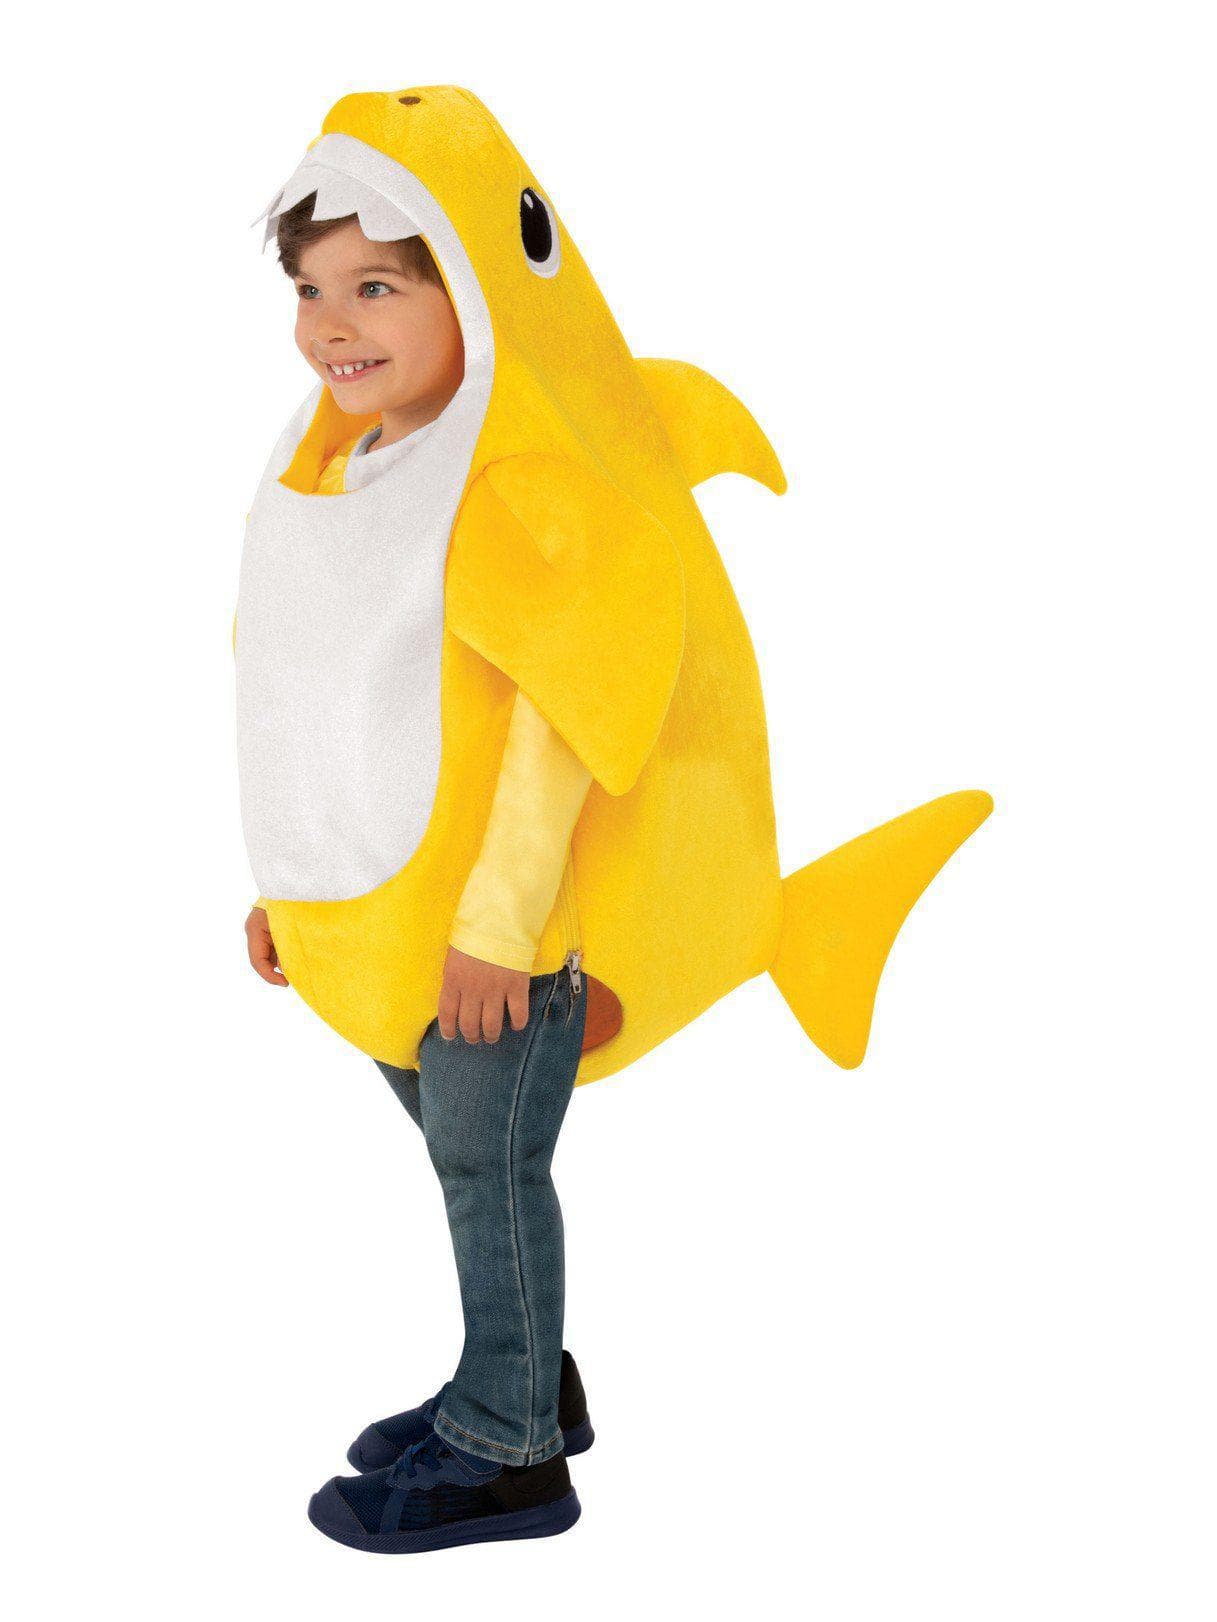 Baby Shark Costume for Babies and Toddlers - costumes.com